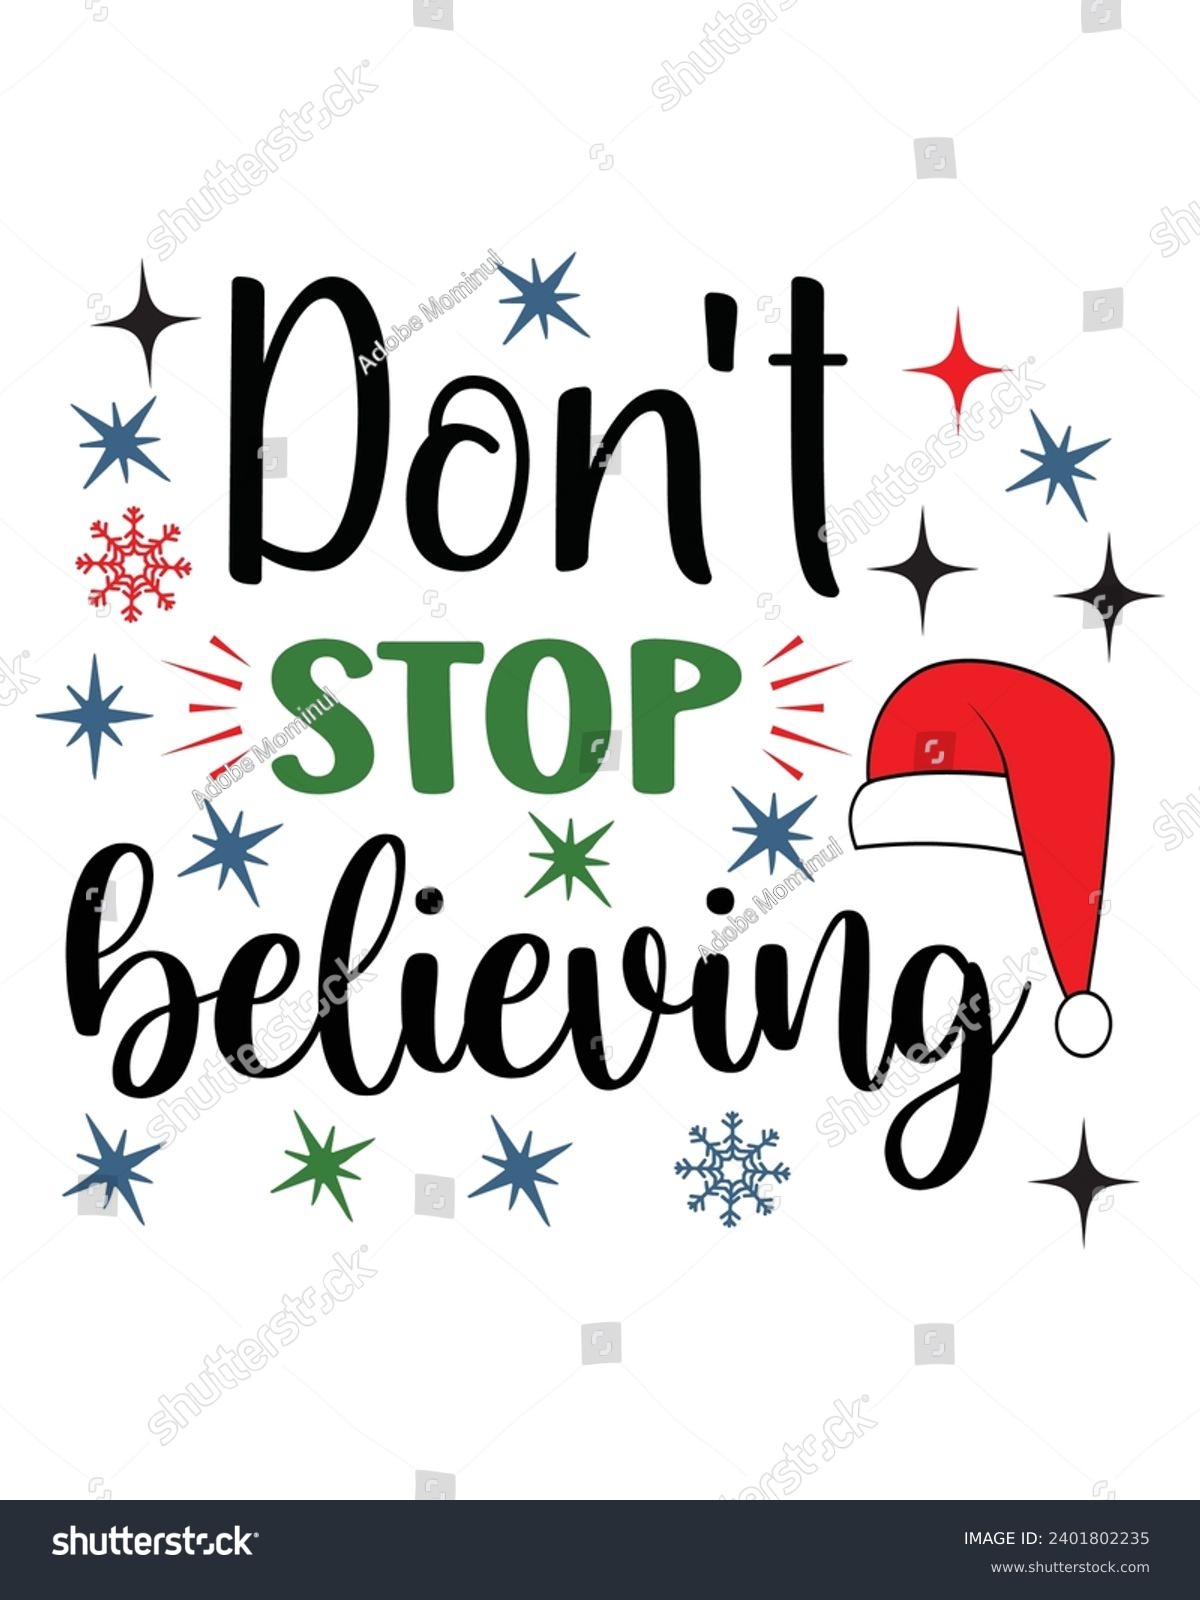 SVG of Don't Stop Believing Svg,Winter Svg,Freezing Season T-Shirt,Christmas Svg,Funny Holiday Quote,New Year Quotes,Winter Quotes,Winter Cut File,Holiday Svg,Cold Season Greetings,Winter, Cold Days svg